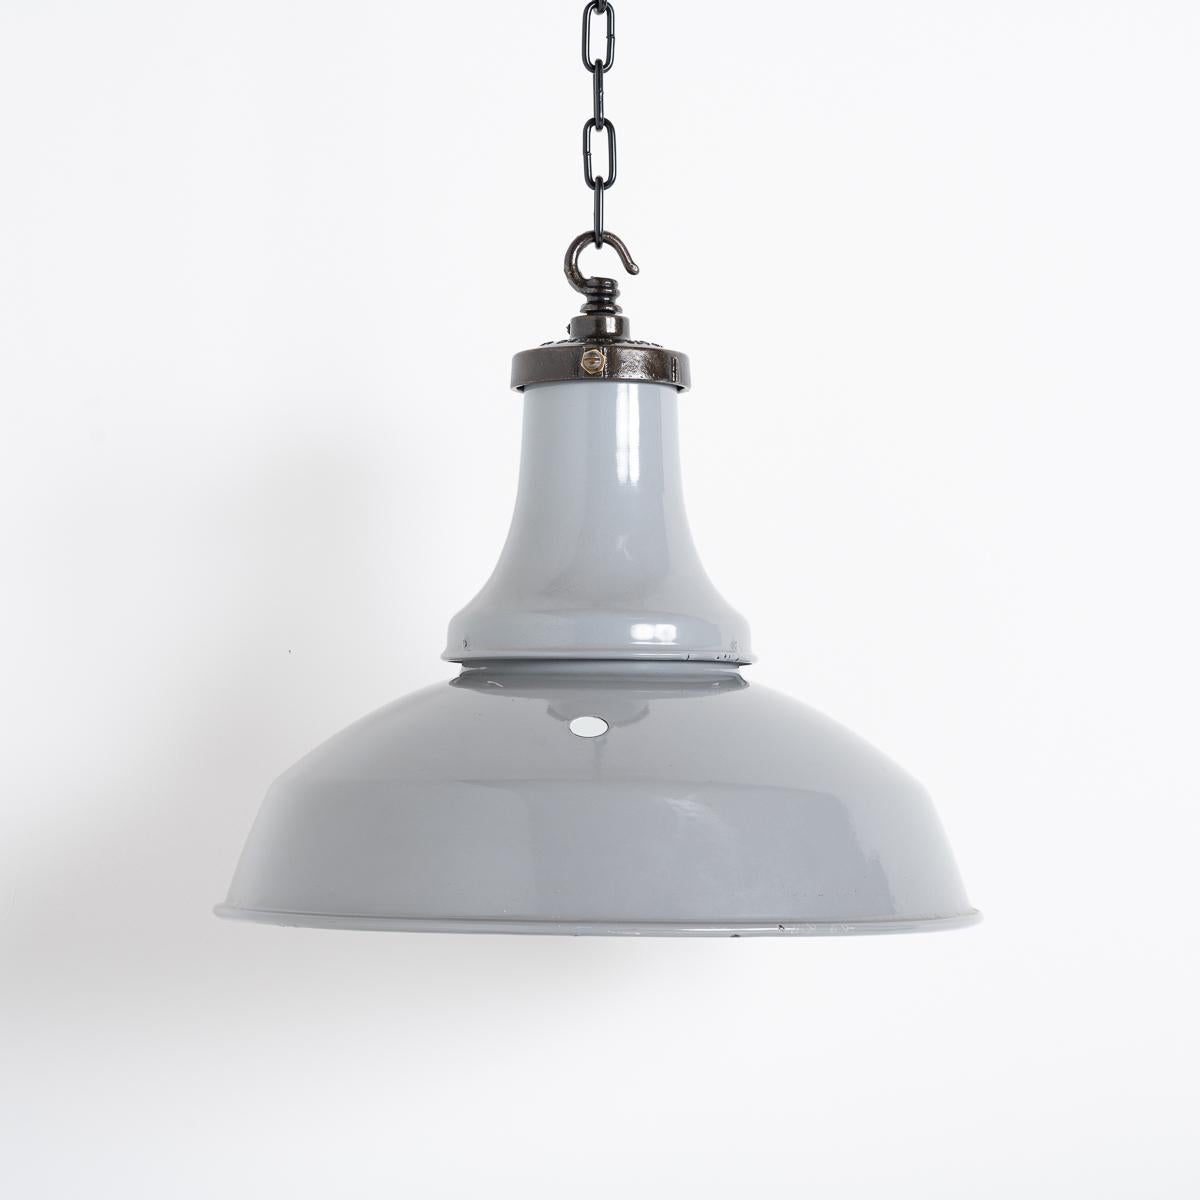 Reclaimed Industrial Vitreous Enamelled Pendant Lights by Benjamin Electric For Sale 6